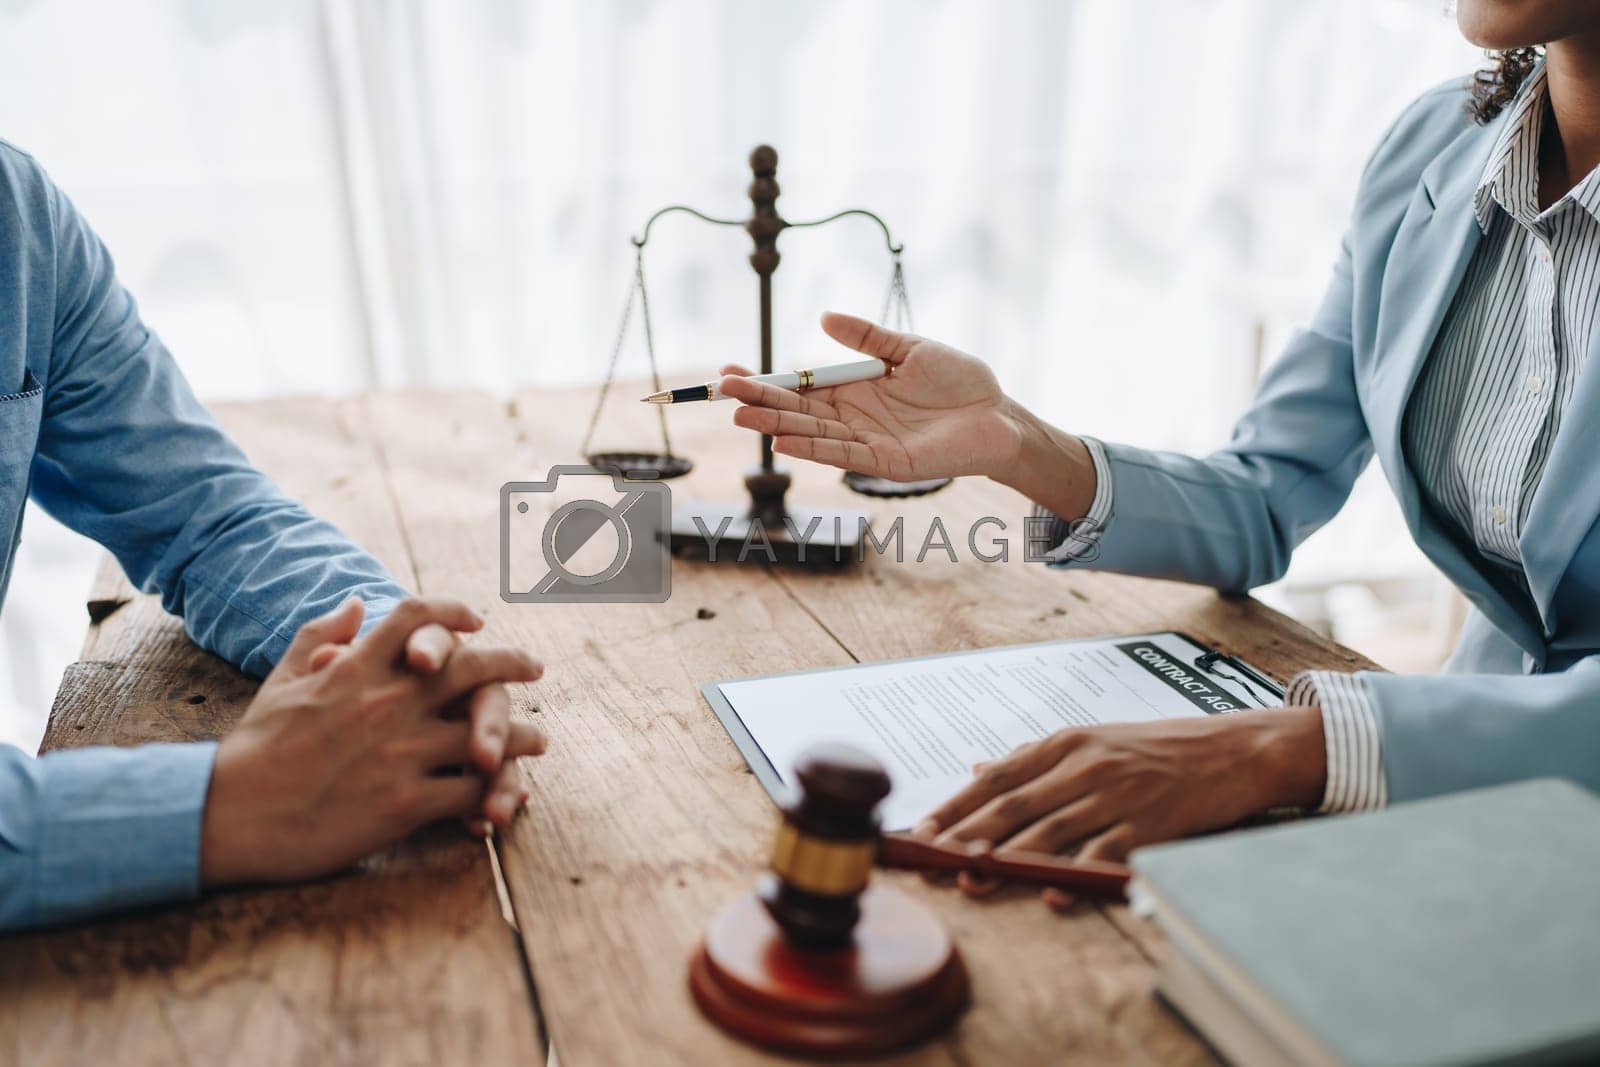 Royalty free image of african american attorney, lawyers discussing contract or business agreement at law firm office, Business people making deal document legal, justice advice service concepts by Manastrong